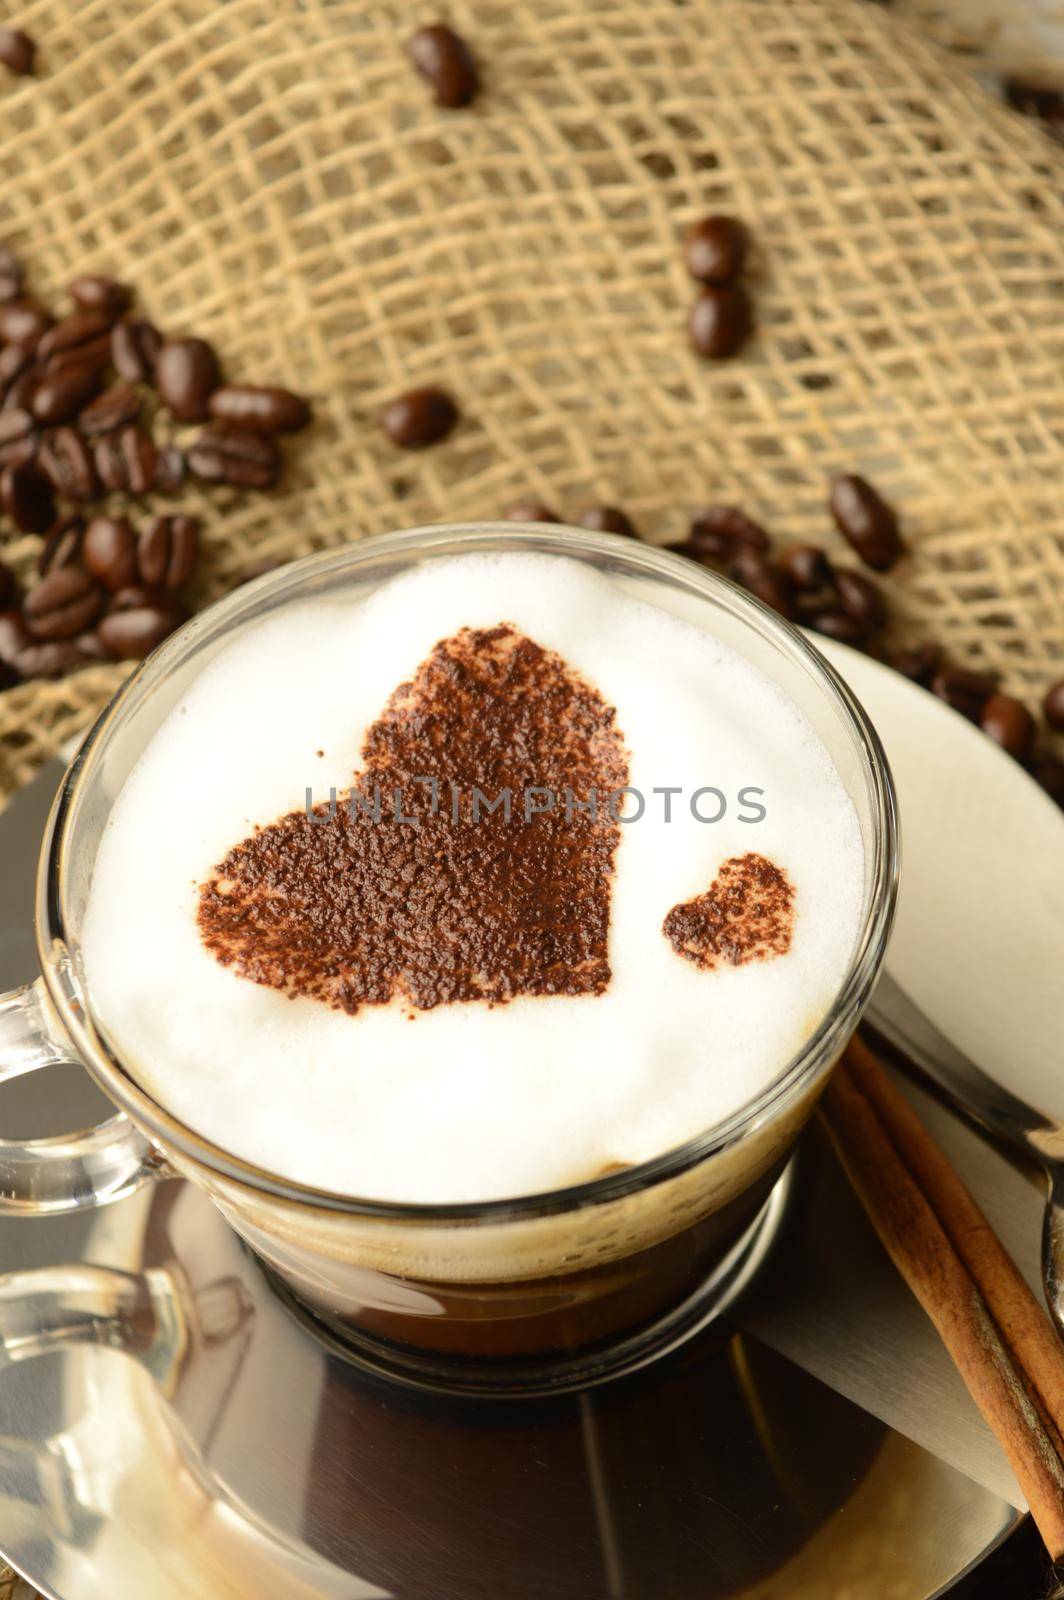 A specialty cup of brewed coffee with a heart shape design while resting among roasted beans.